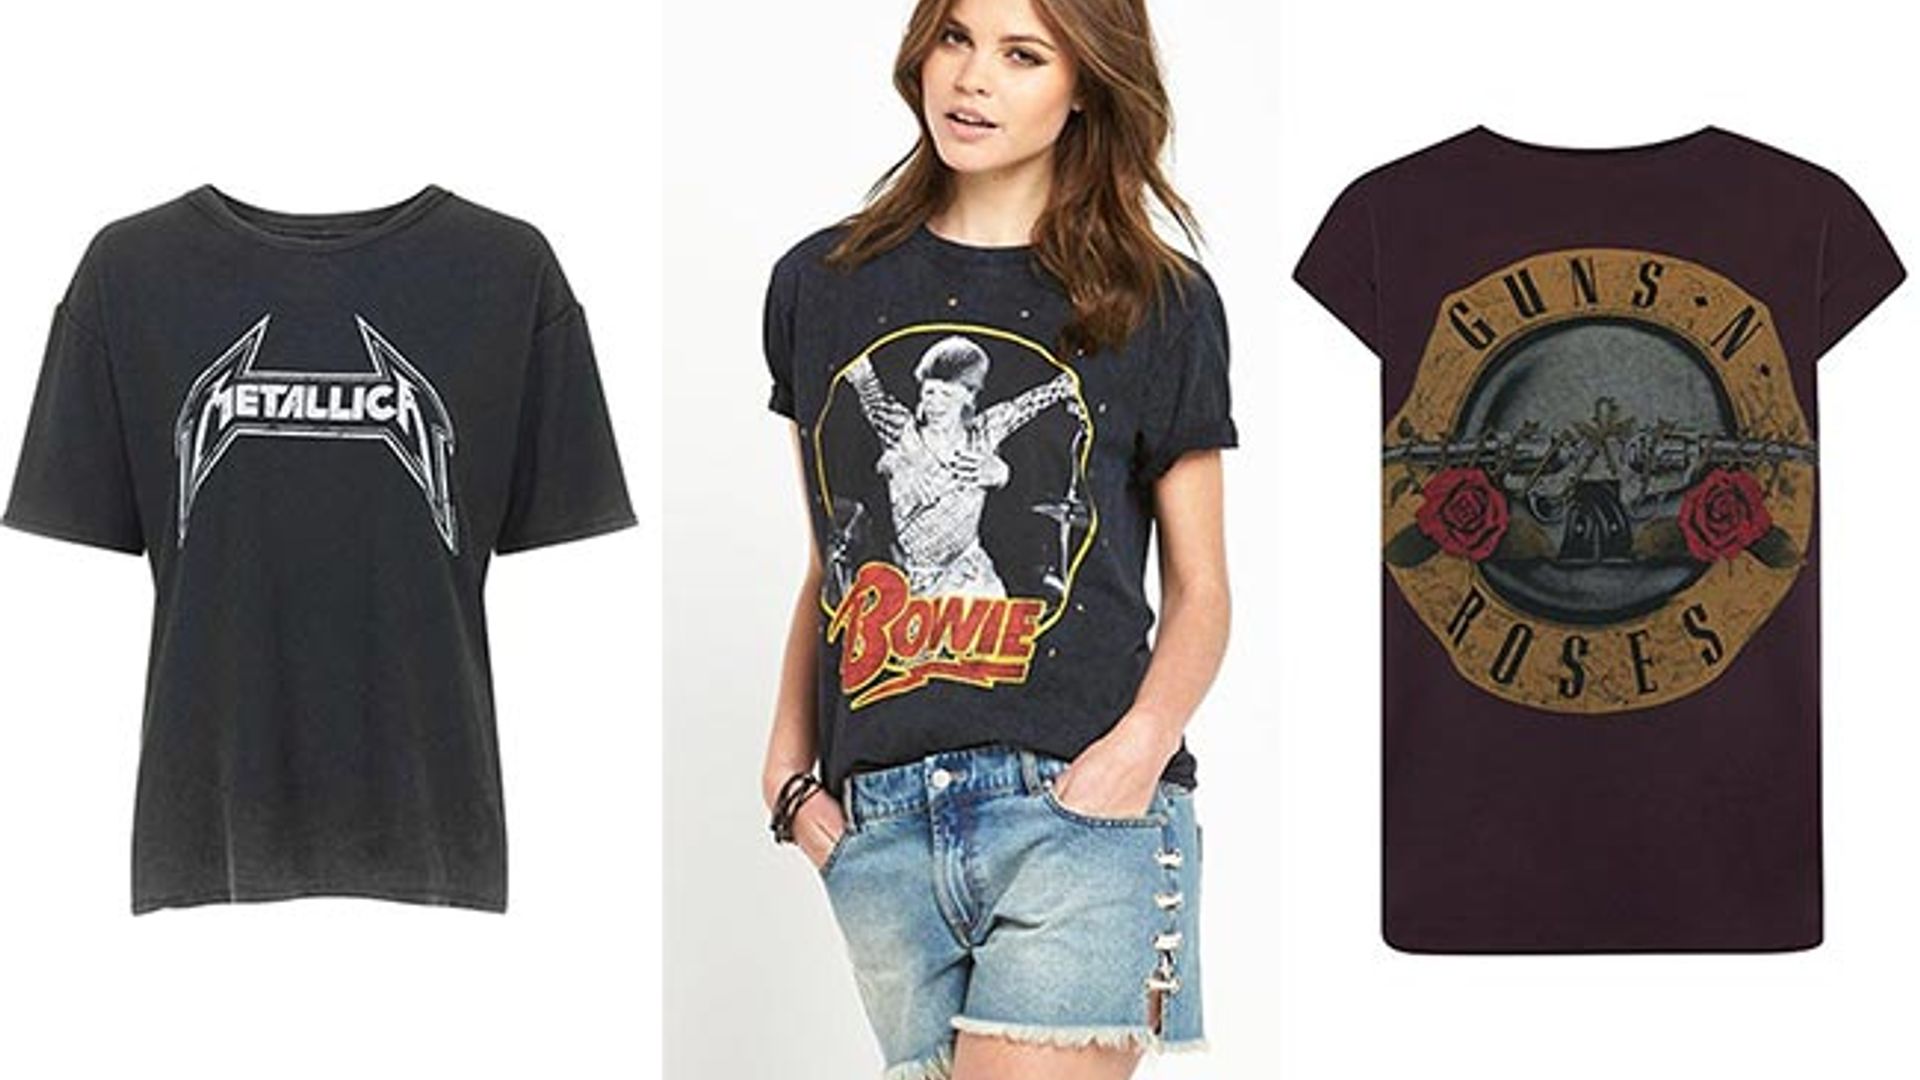 New in Primark: New range of band t-shirts perfect for summer